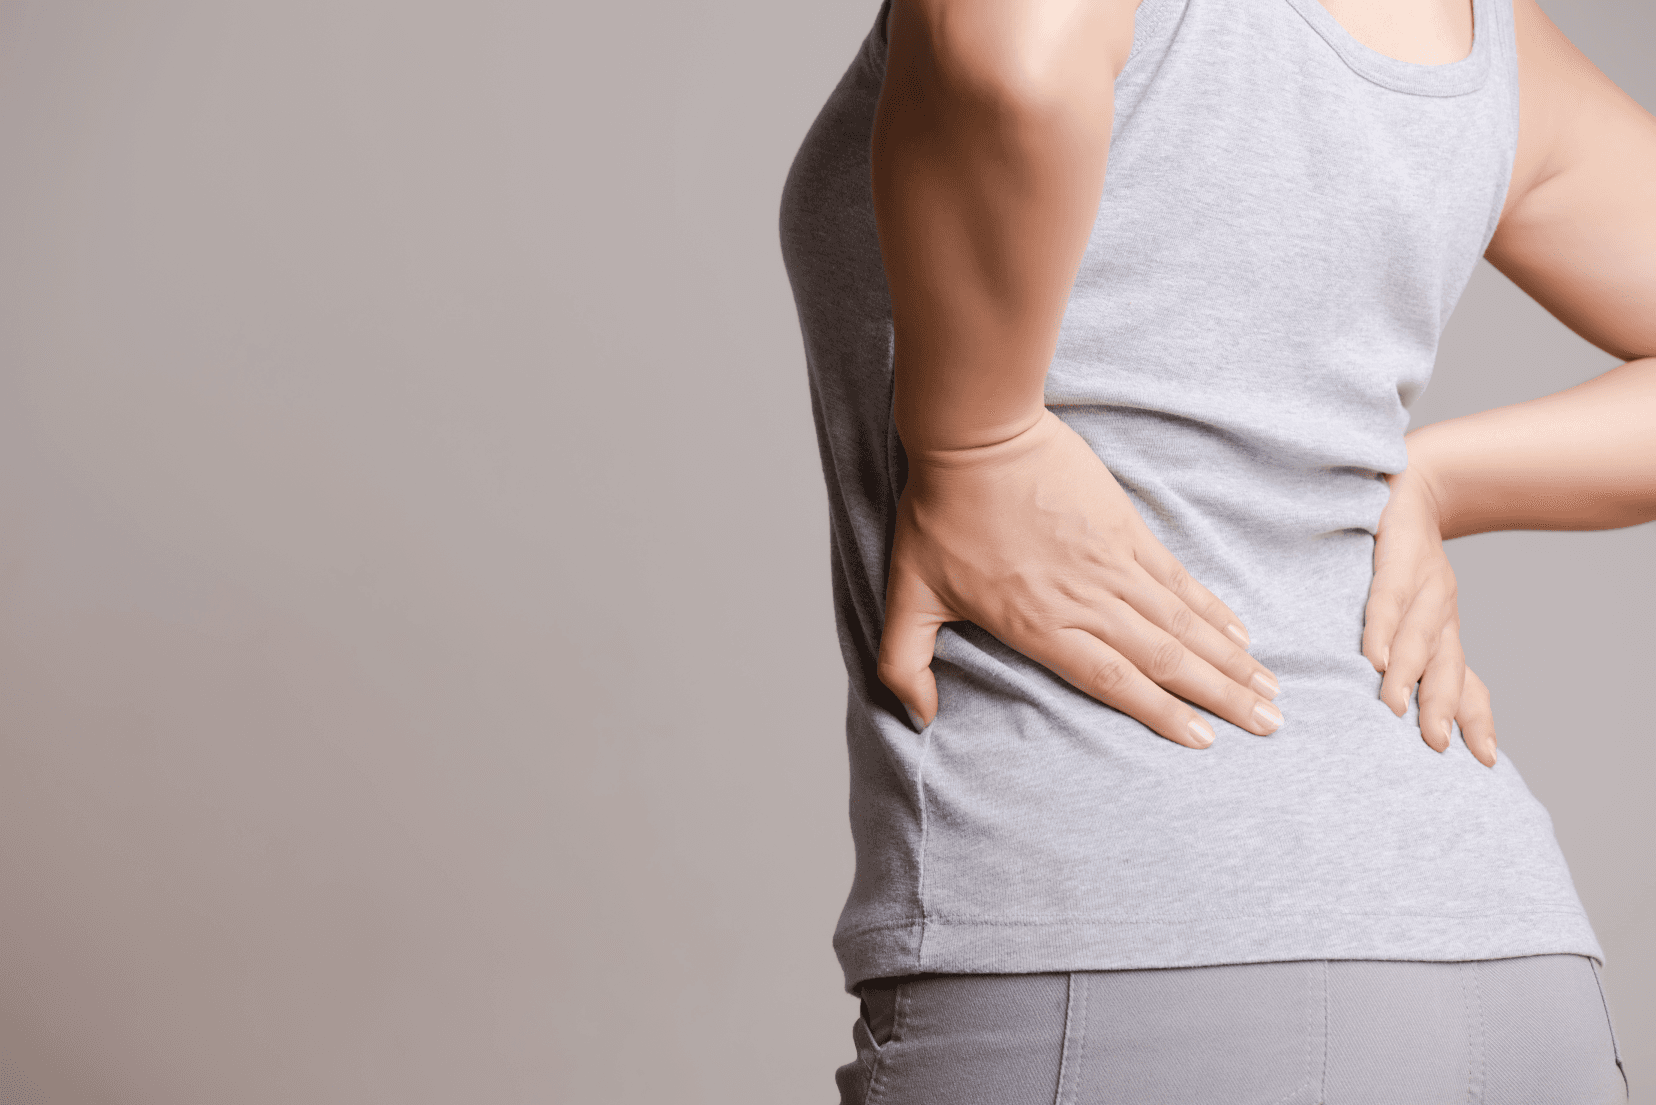 12 Best Home Remedy For Back Pain